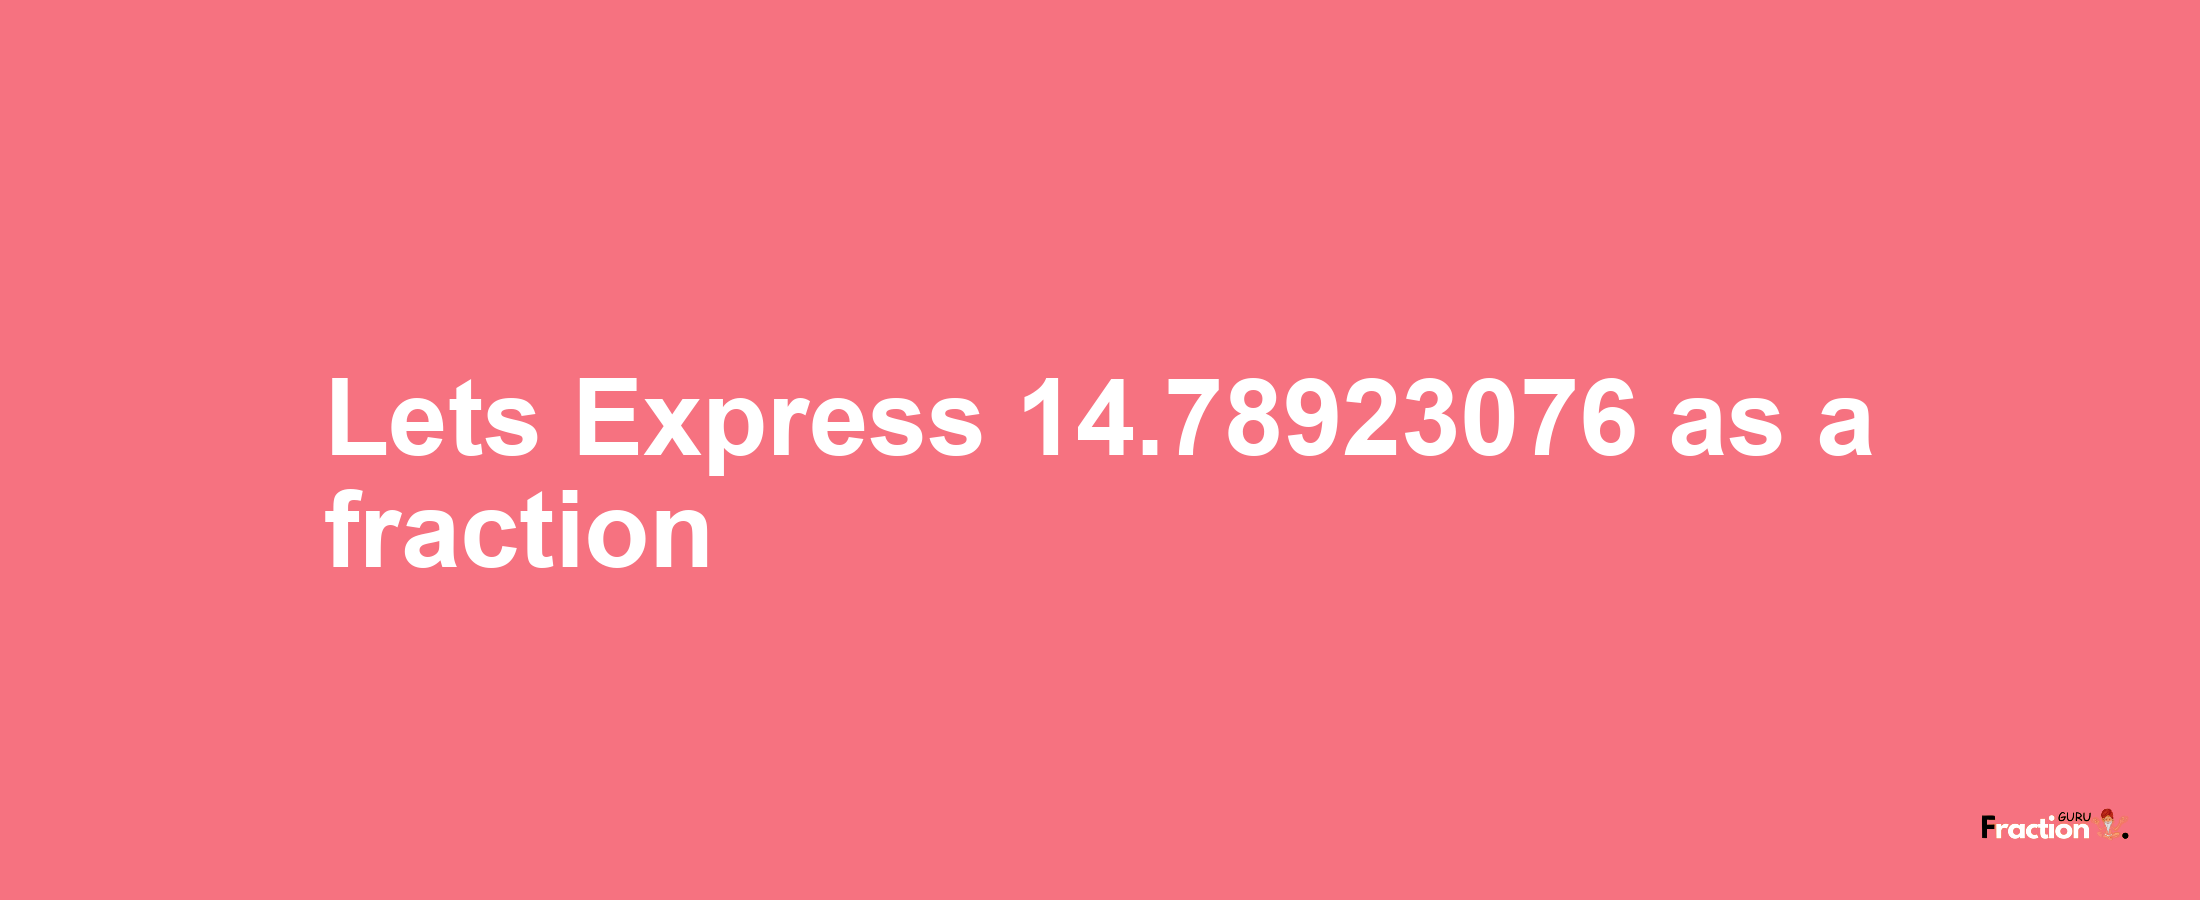 Lets Express 14.78923076 as afraction